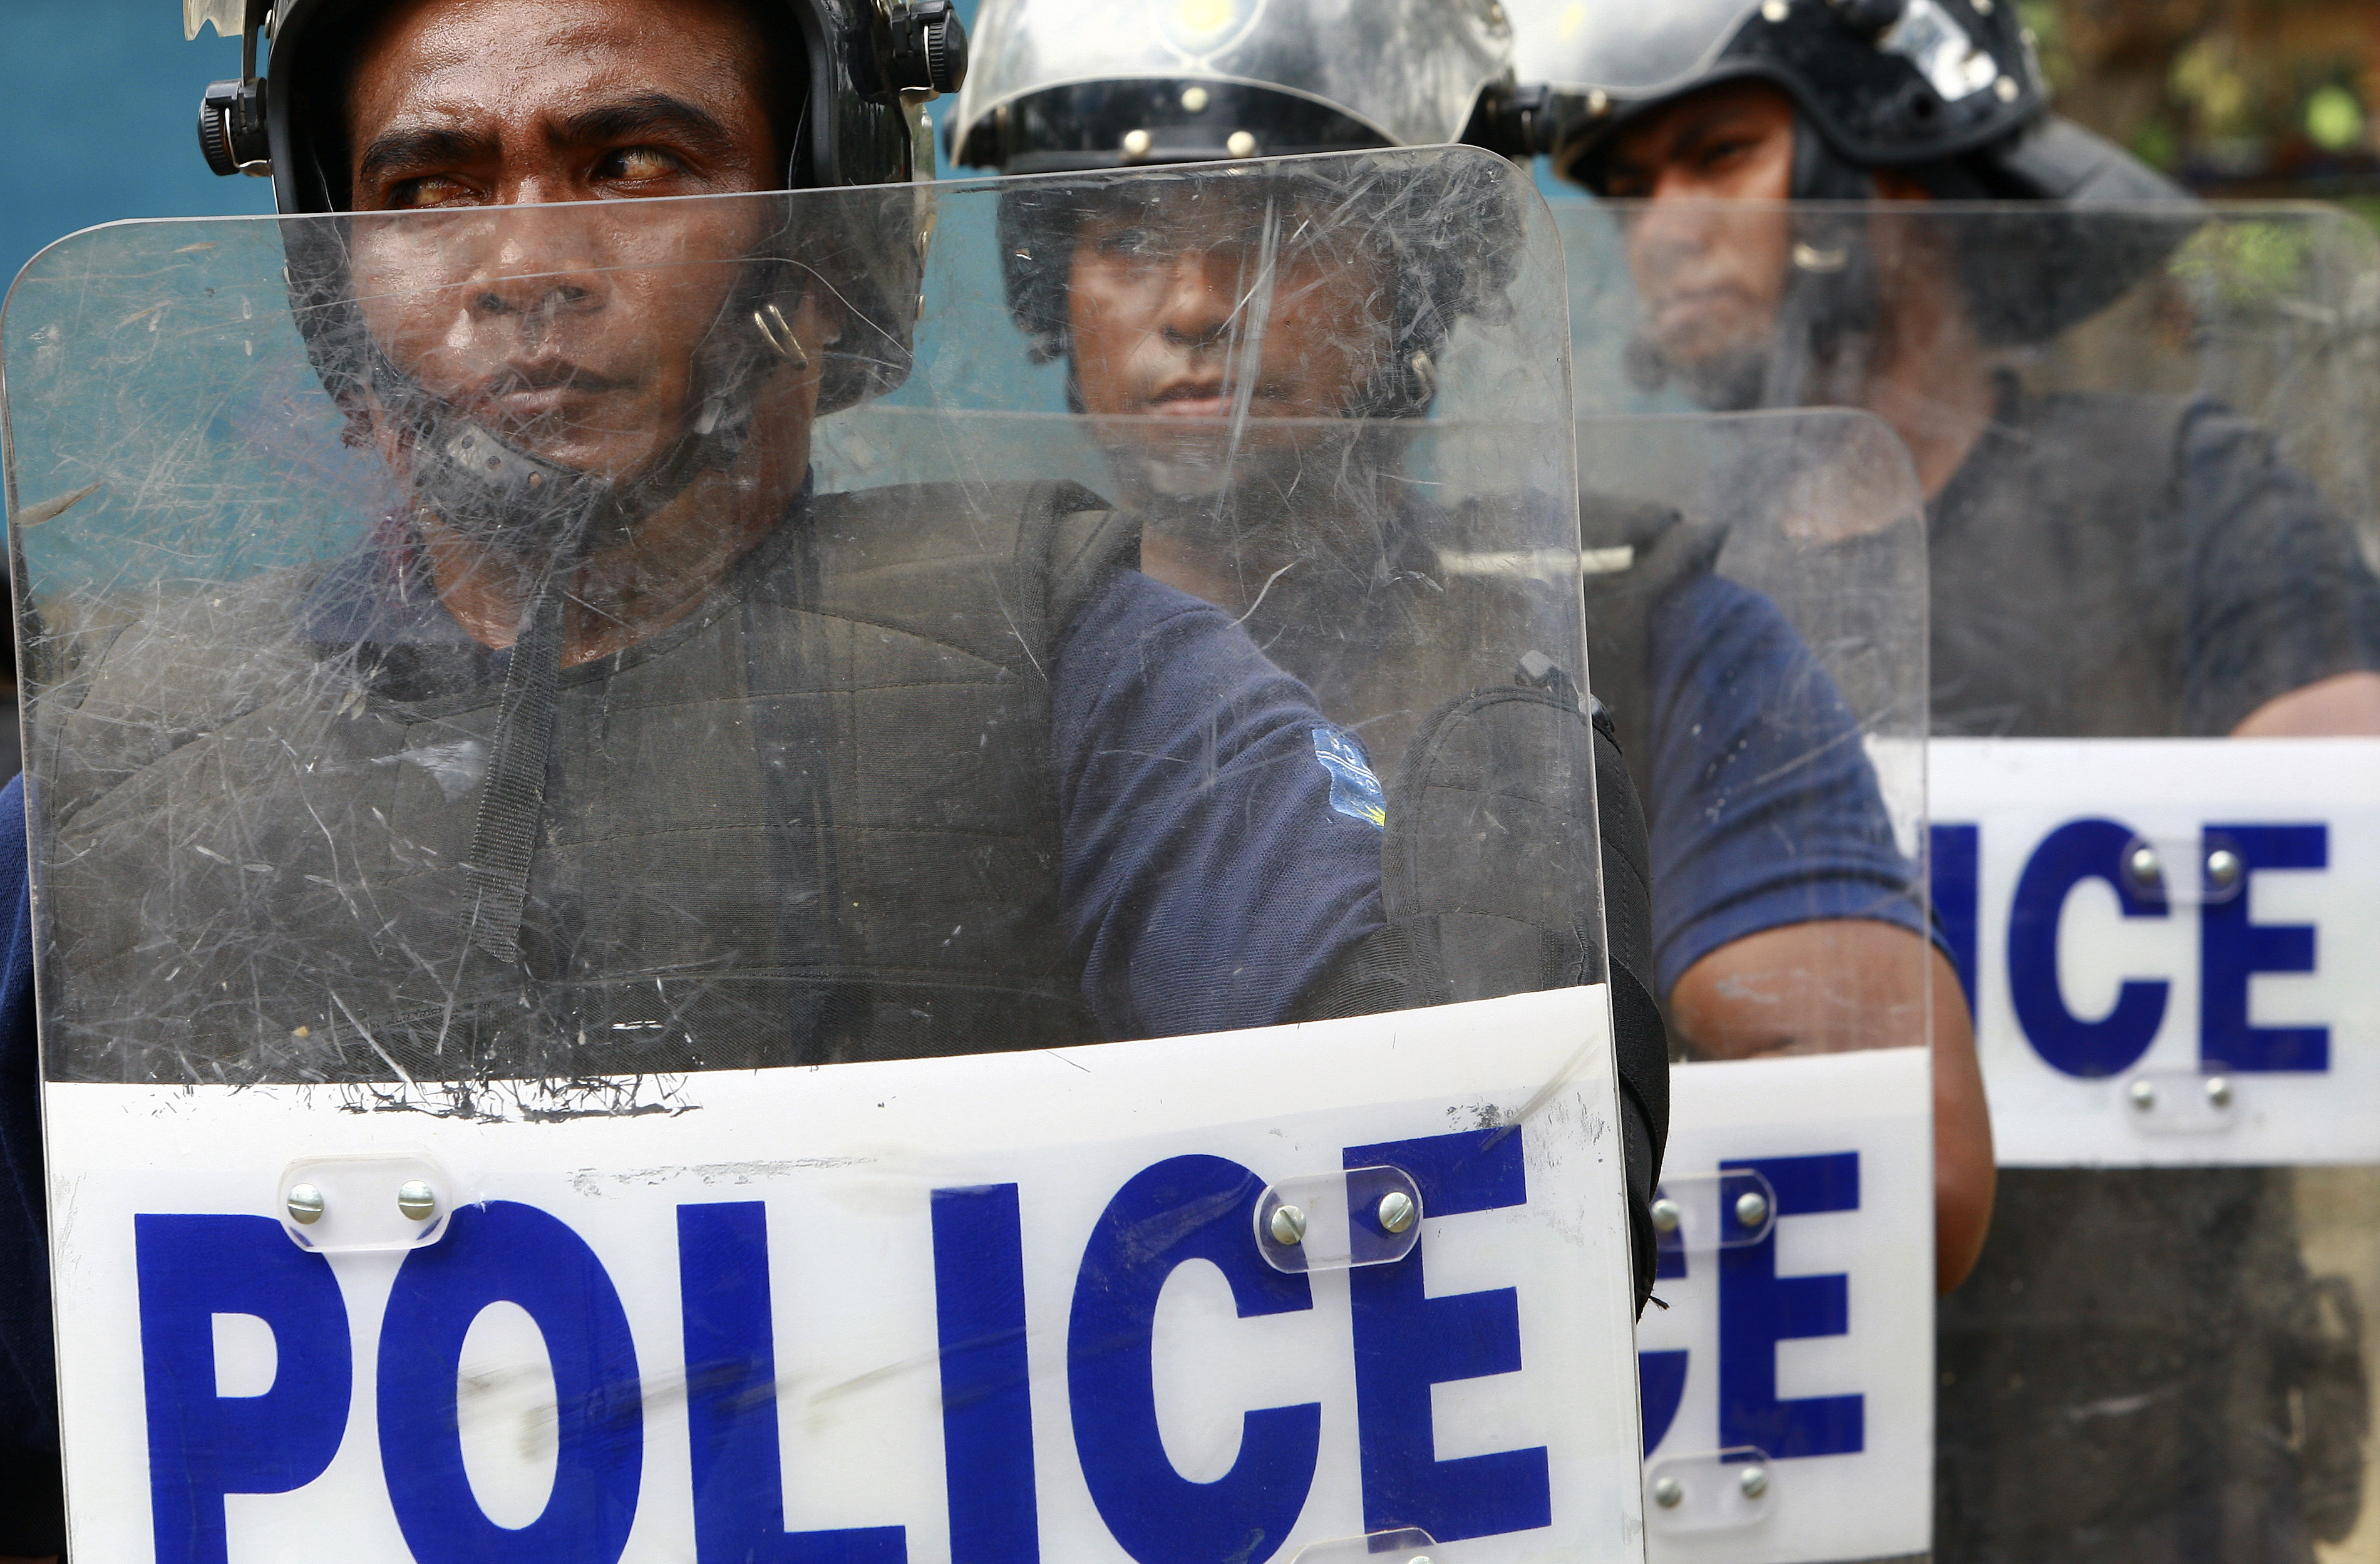 Timorese police officers perform a tactical demonstration exercise after a 3-week training by UN Police in UNMIT in August 2008. UN photo: Martine Perret